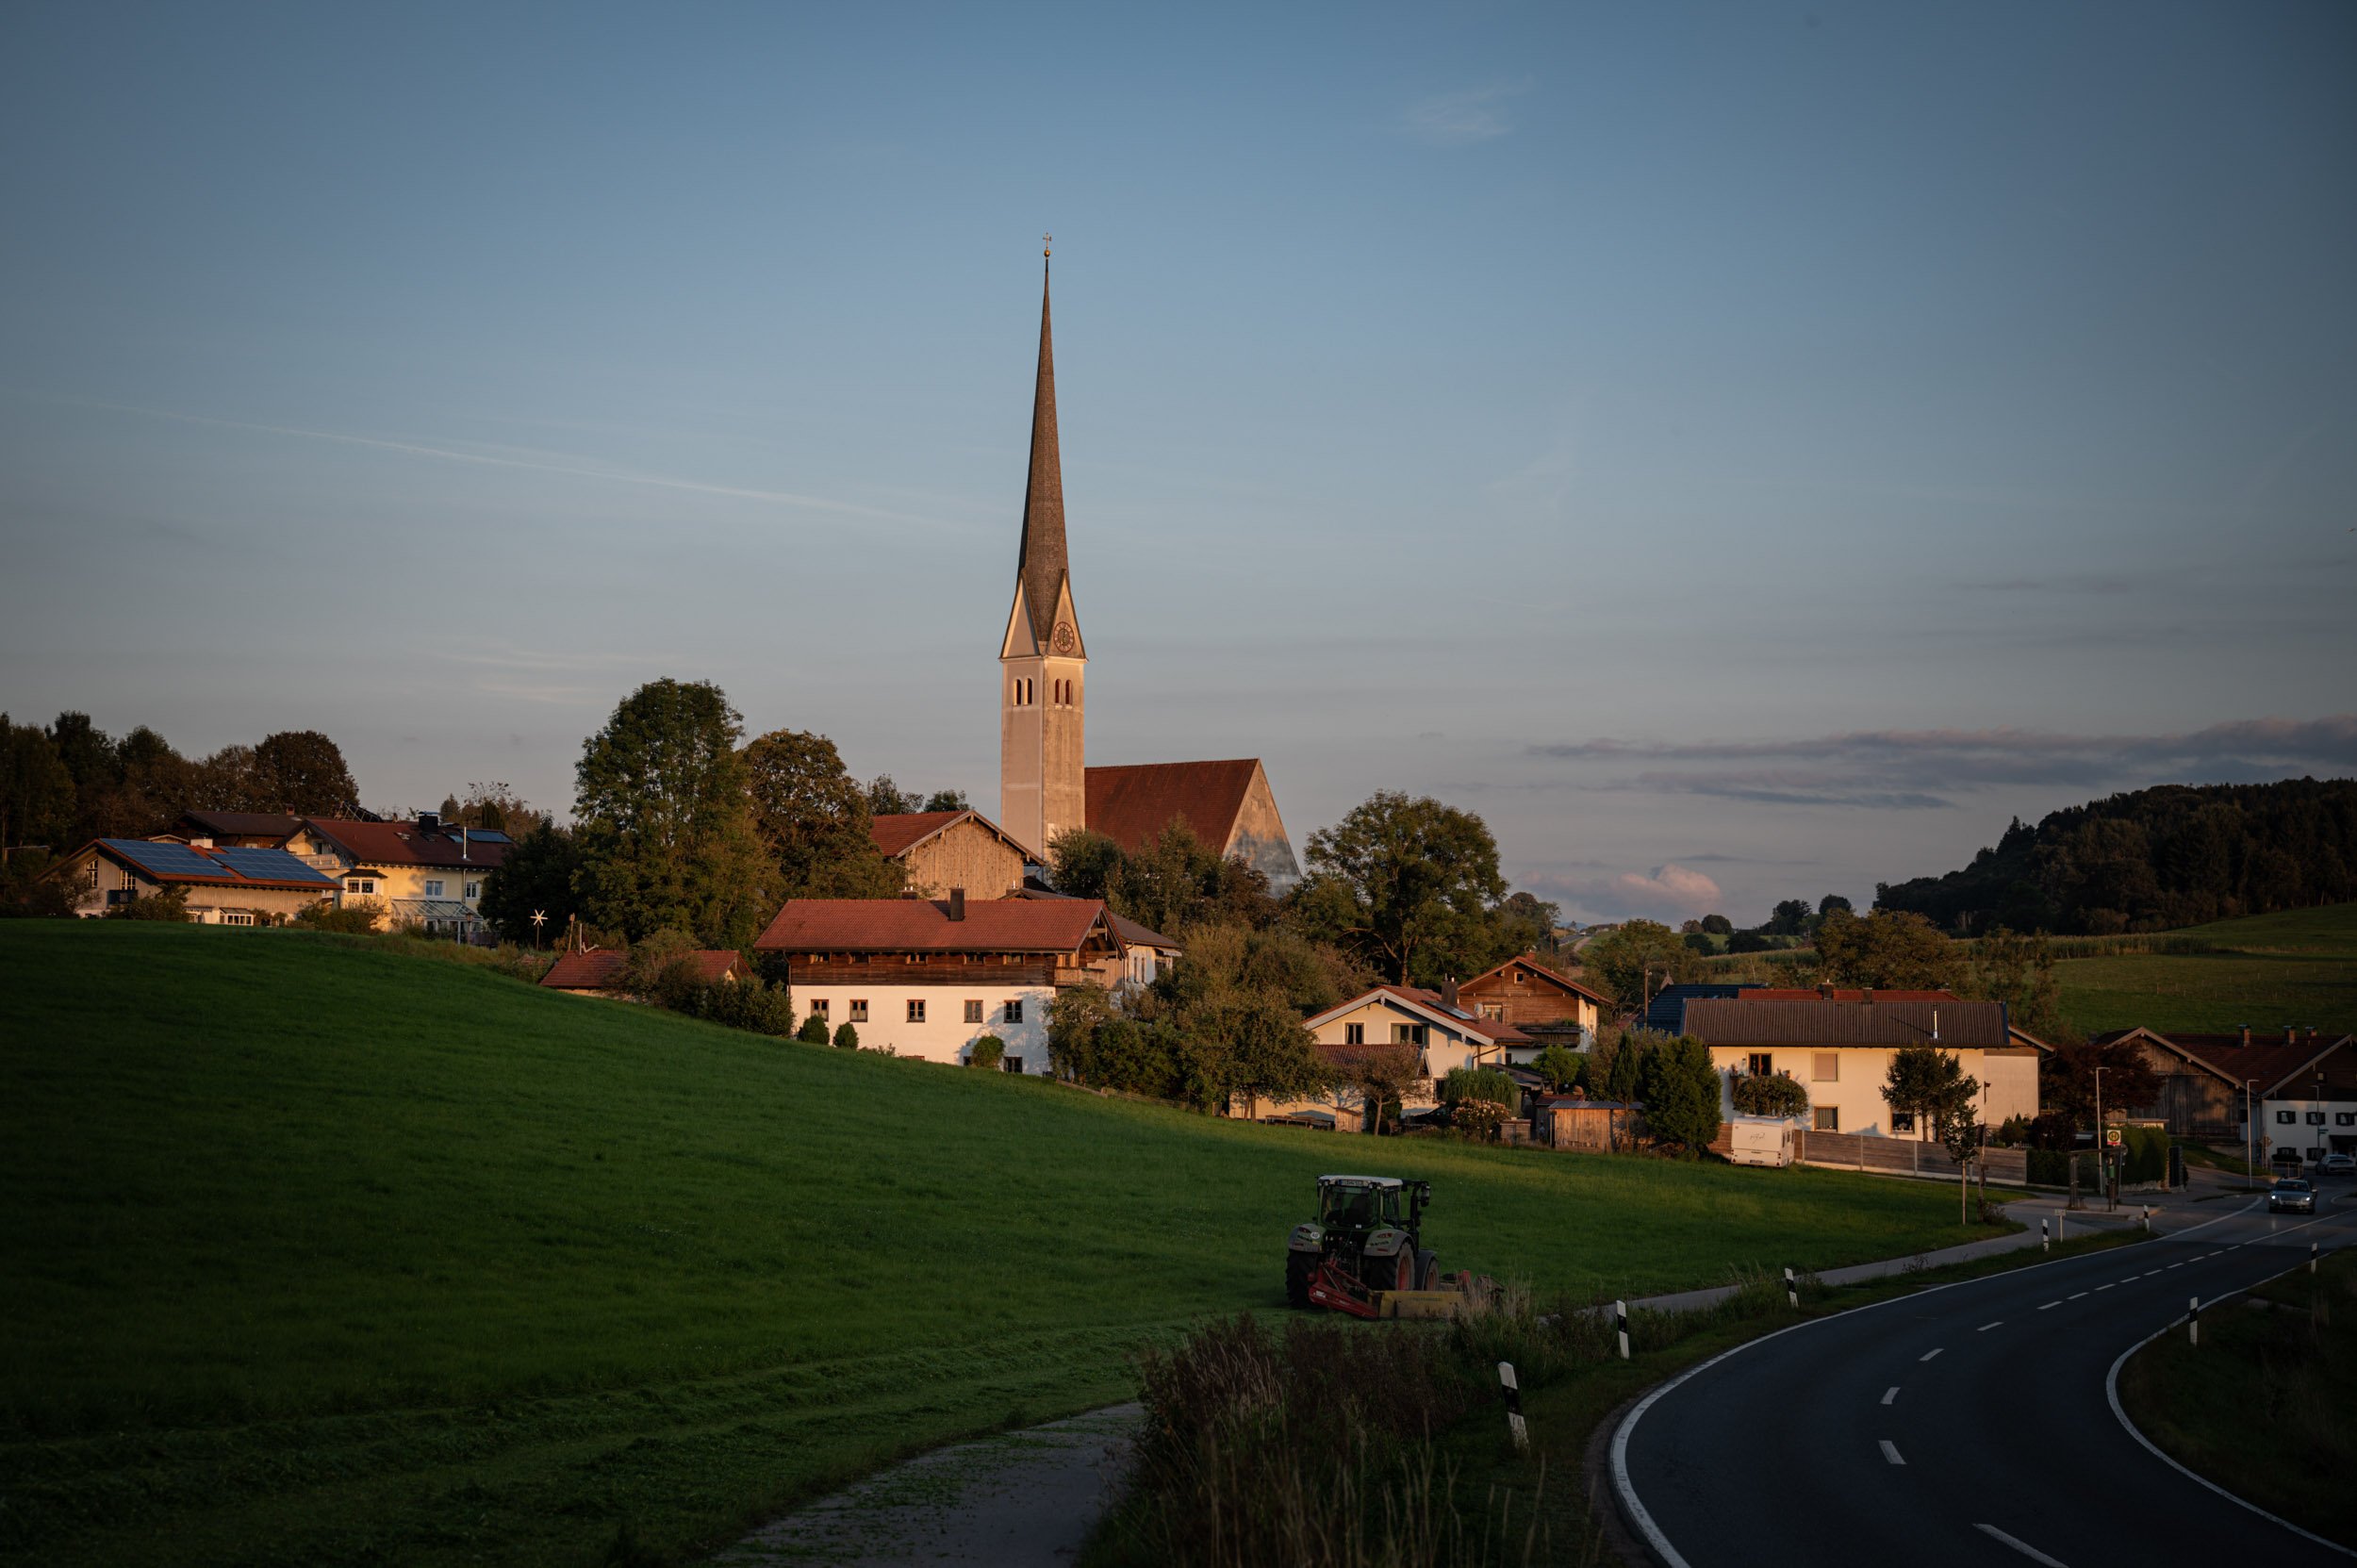  The village of Mauerkirchen in the German state of Bavaria. 